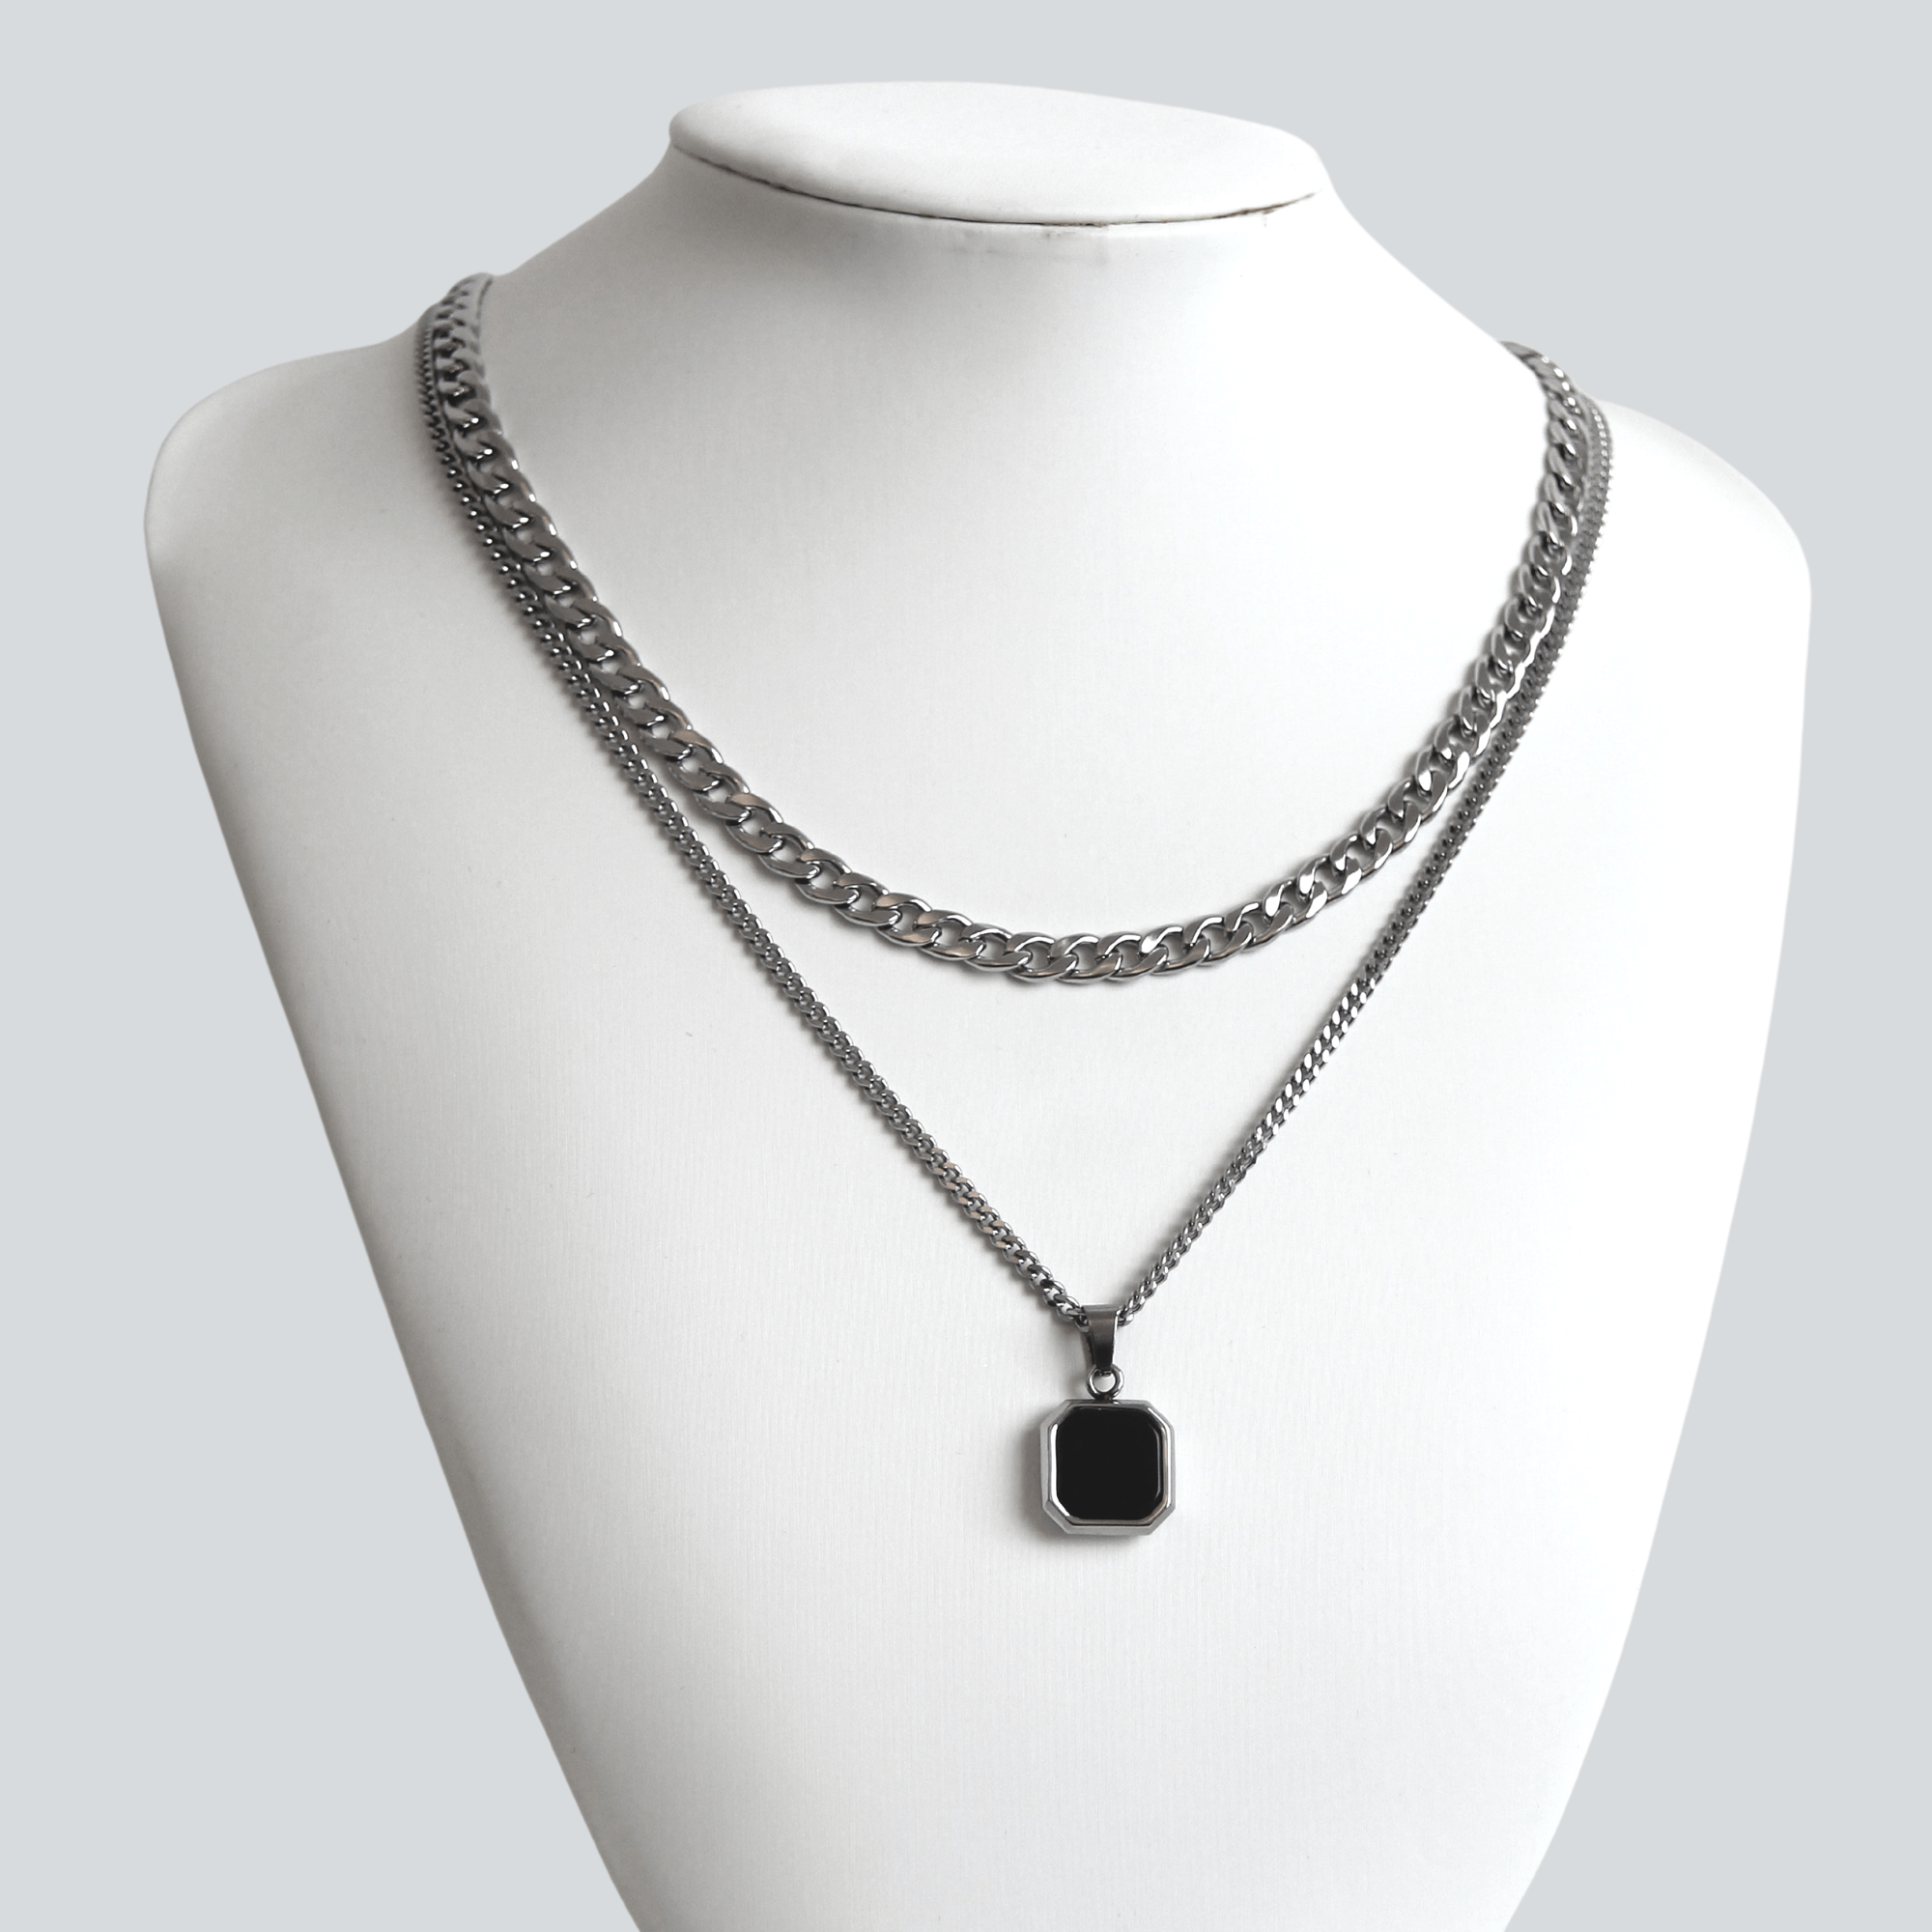 Buy Black Onyx Stone Pendant, Silver Necklace Men, Mens Necklace Pendant,  Gemstone Silver Necklace for Men Mens Jewelry by Twistedpendant Online in  India - Etsy